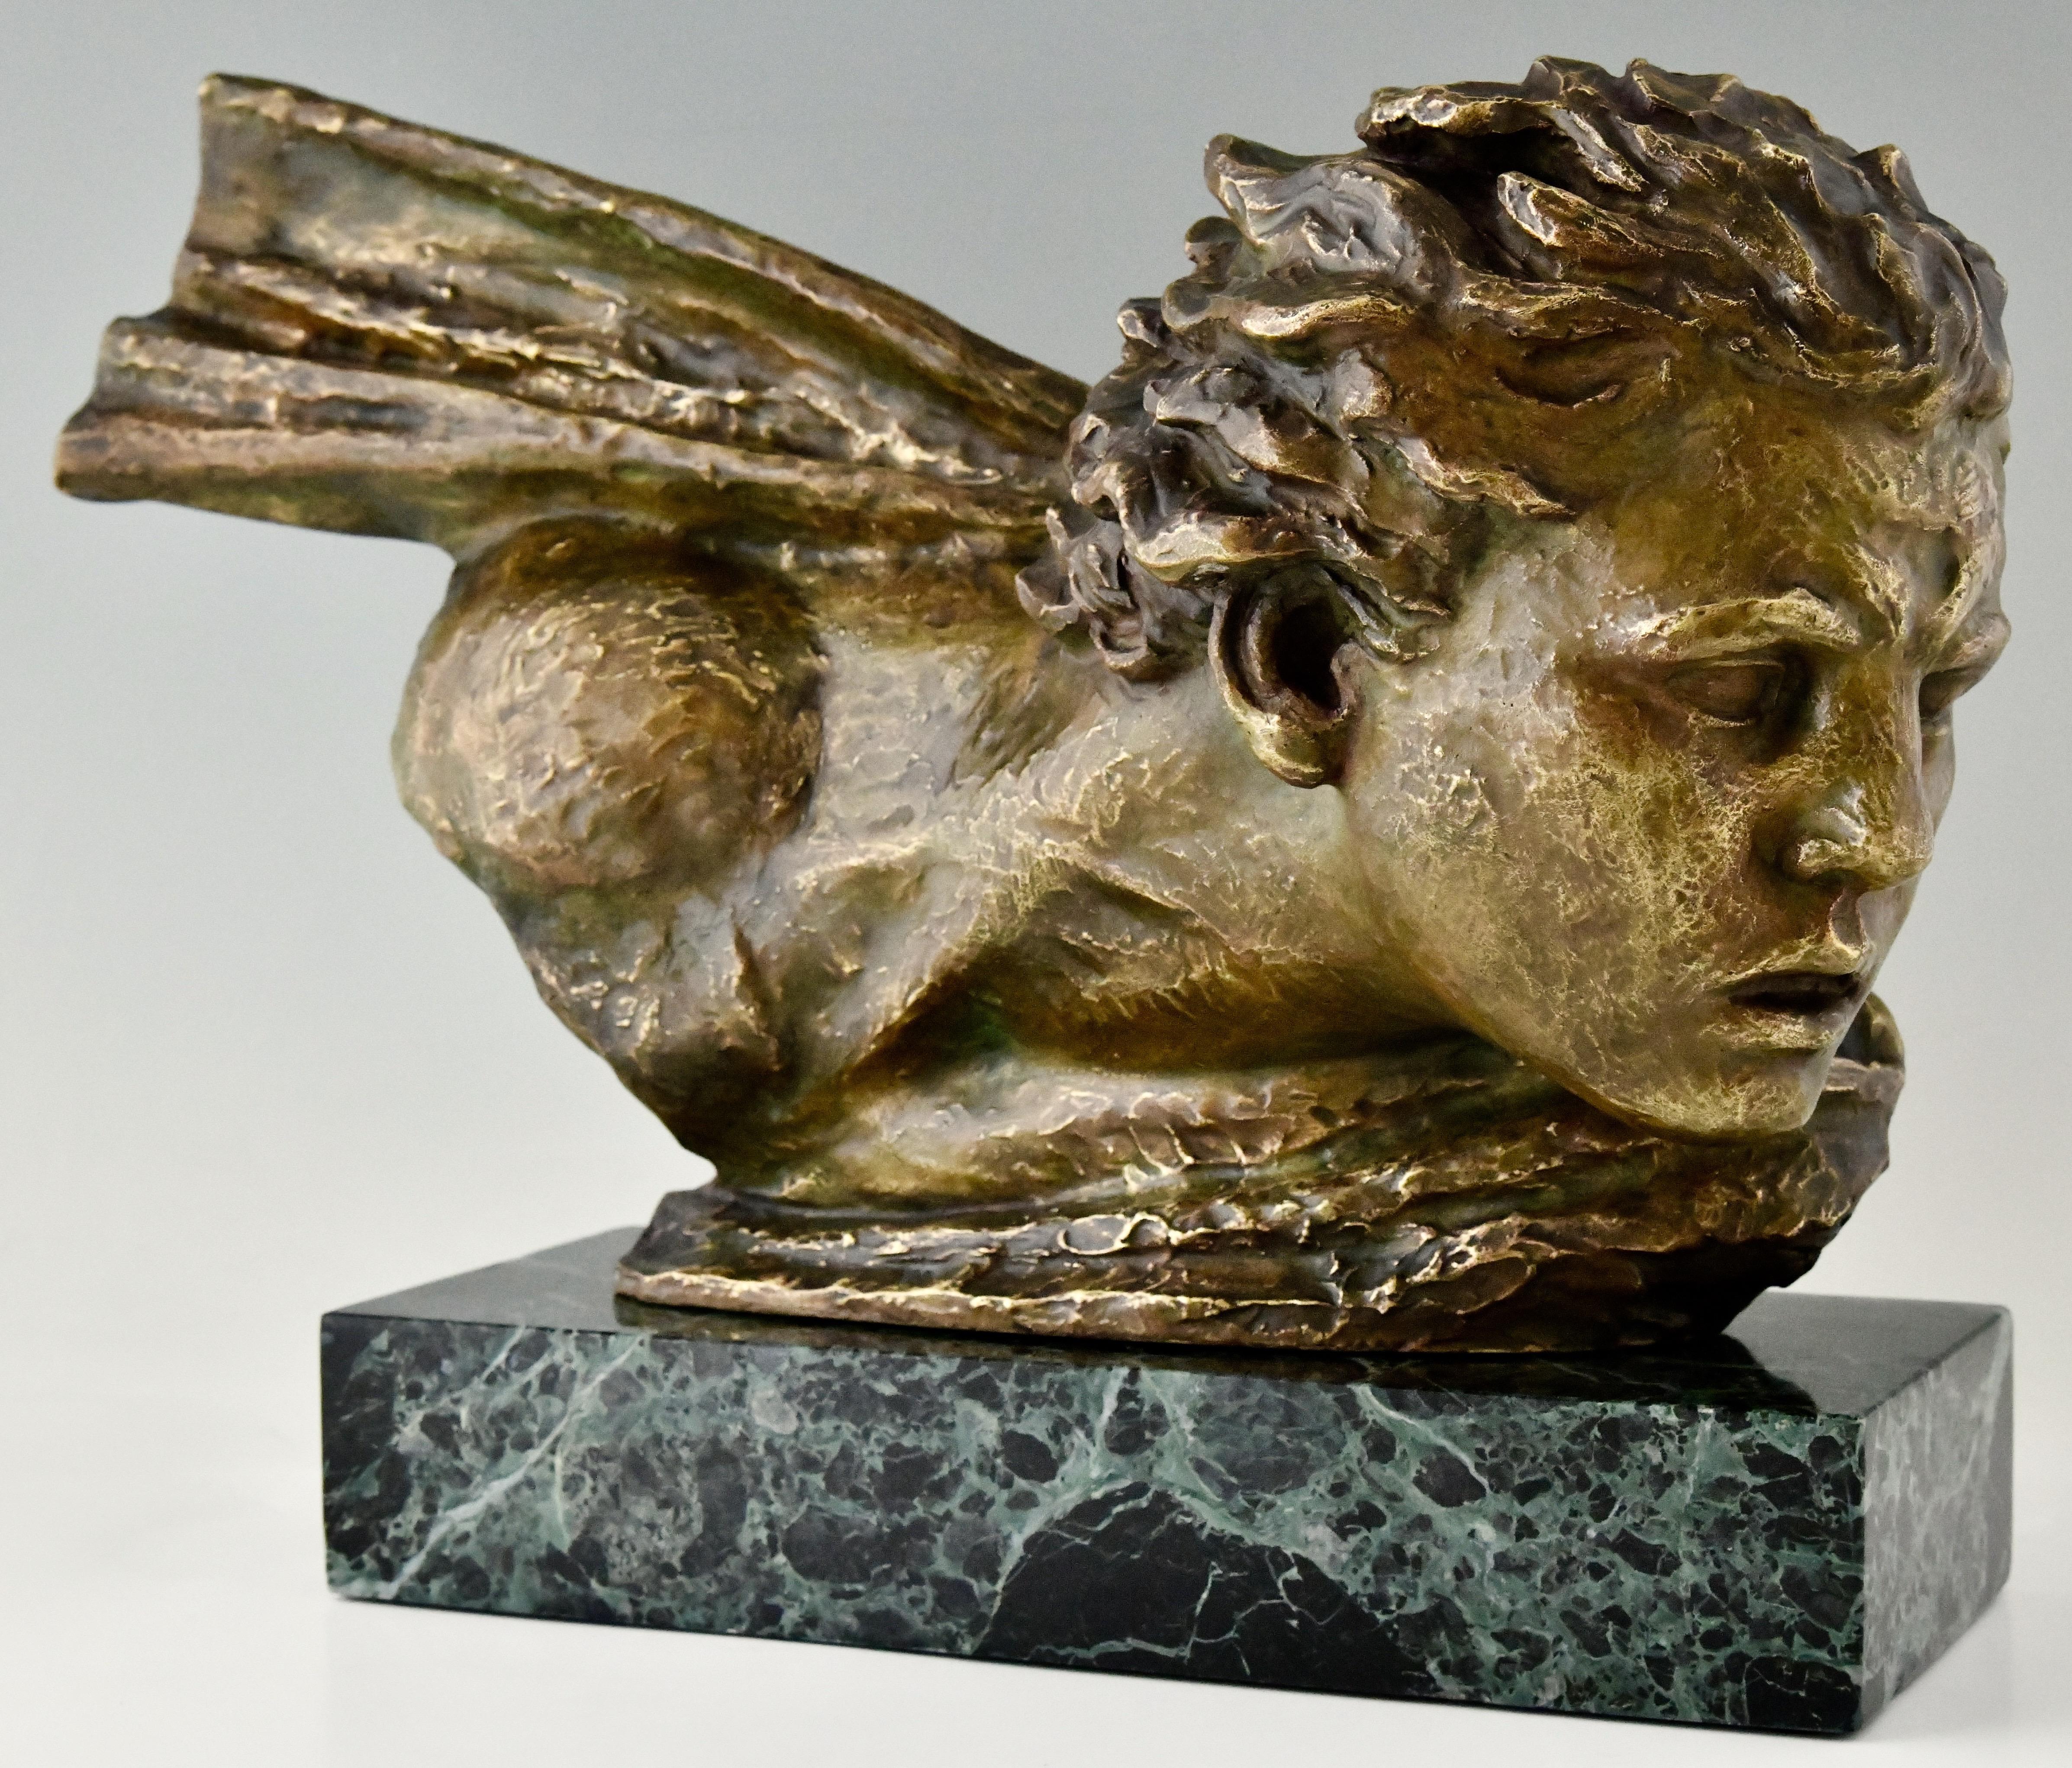 Art Deco bronze sculpture bust of Jean Mermoz by Alexandre Kelety.
Signed Kelety with foundry mark Les Neveux de Lehmann.
Patinated bronze on a green marble base.
France 1930
Literature:
Statuettes of the Art Deco period, Alberto